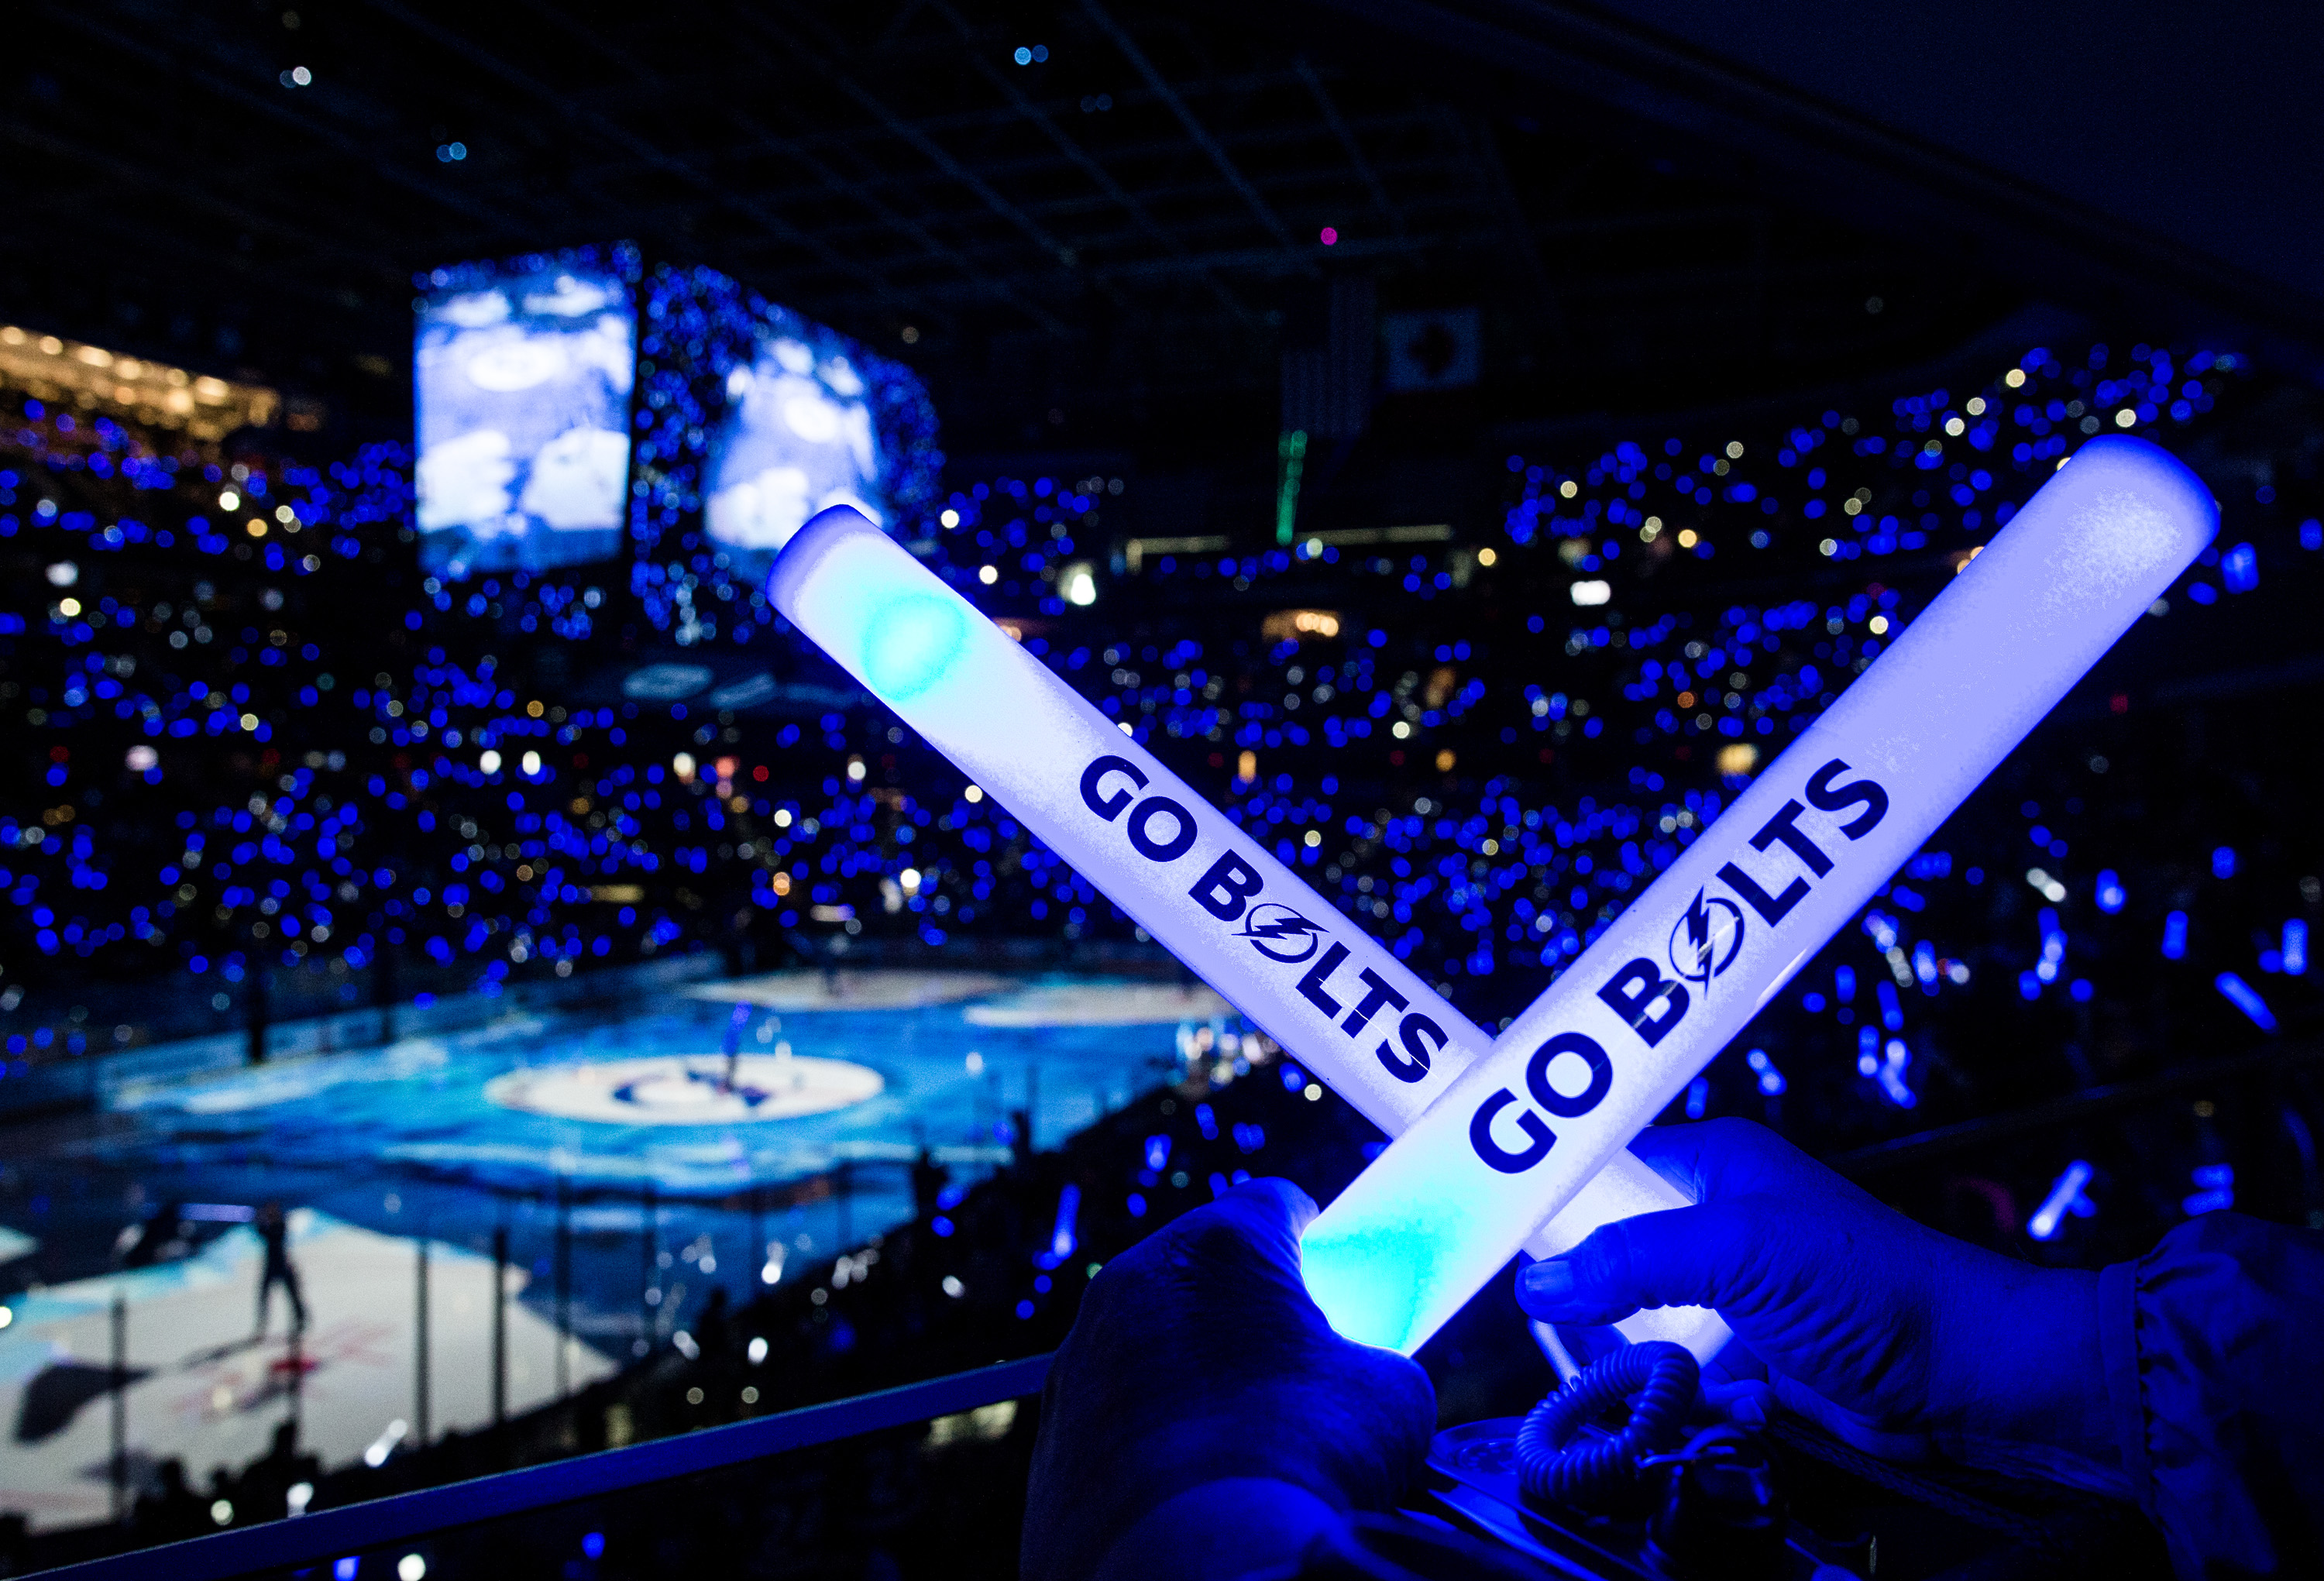 Tampa Bay Lightning to host free Opening Day event for fans